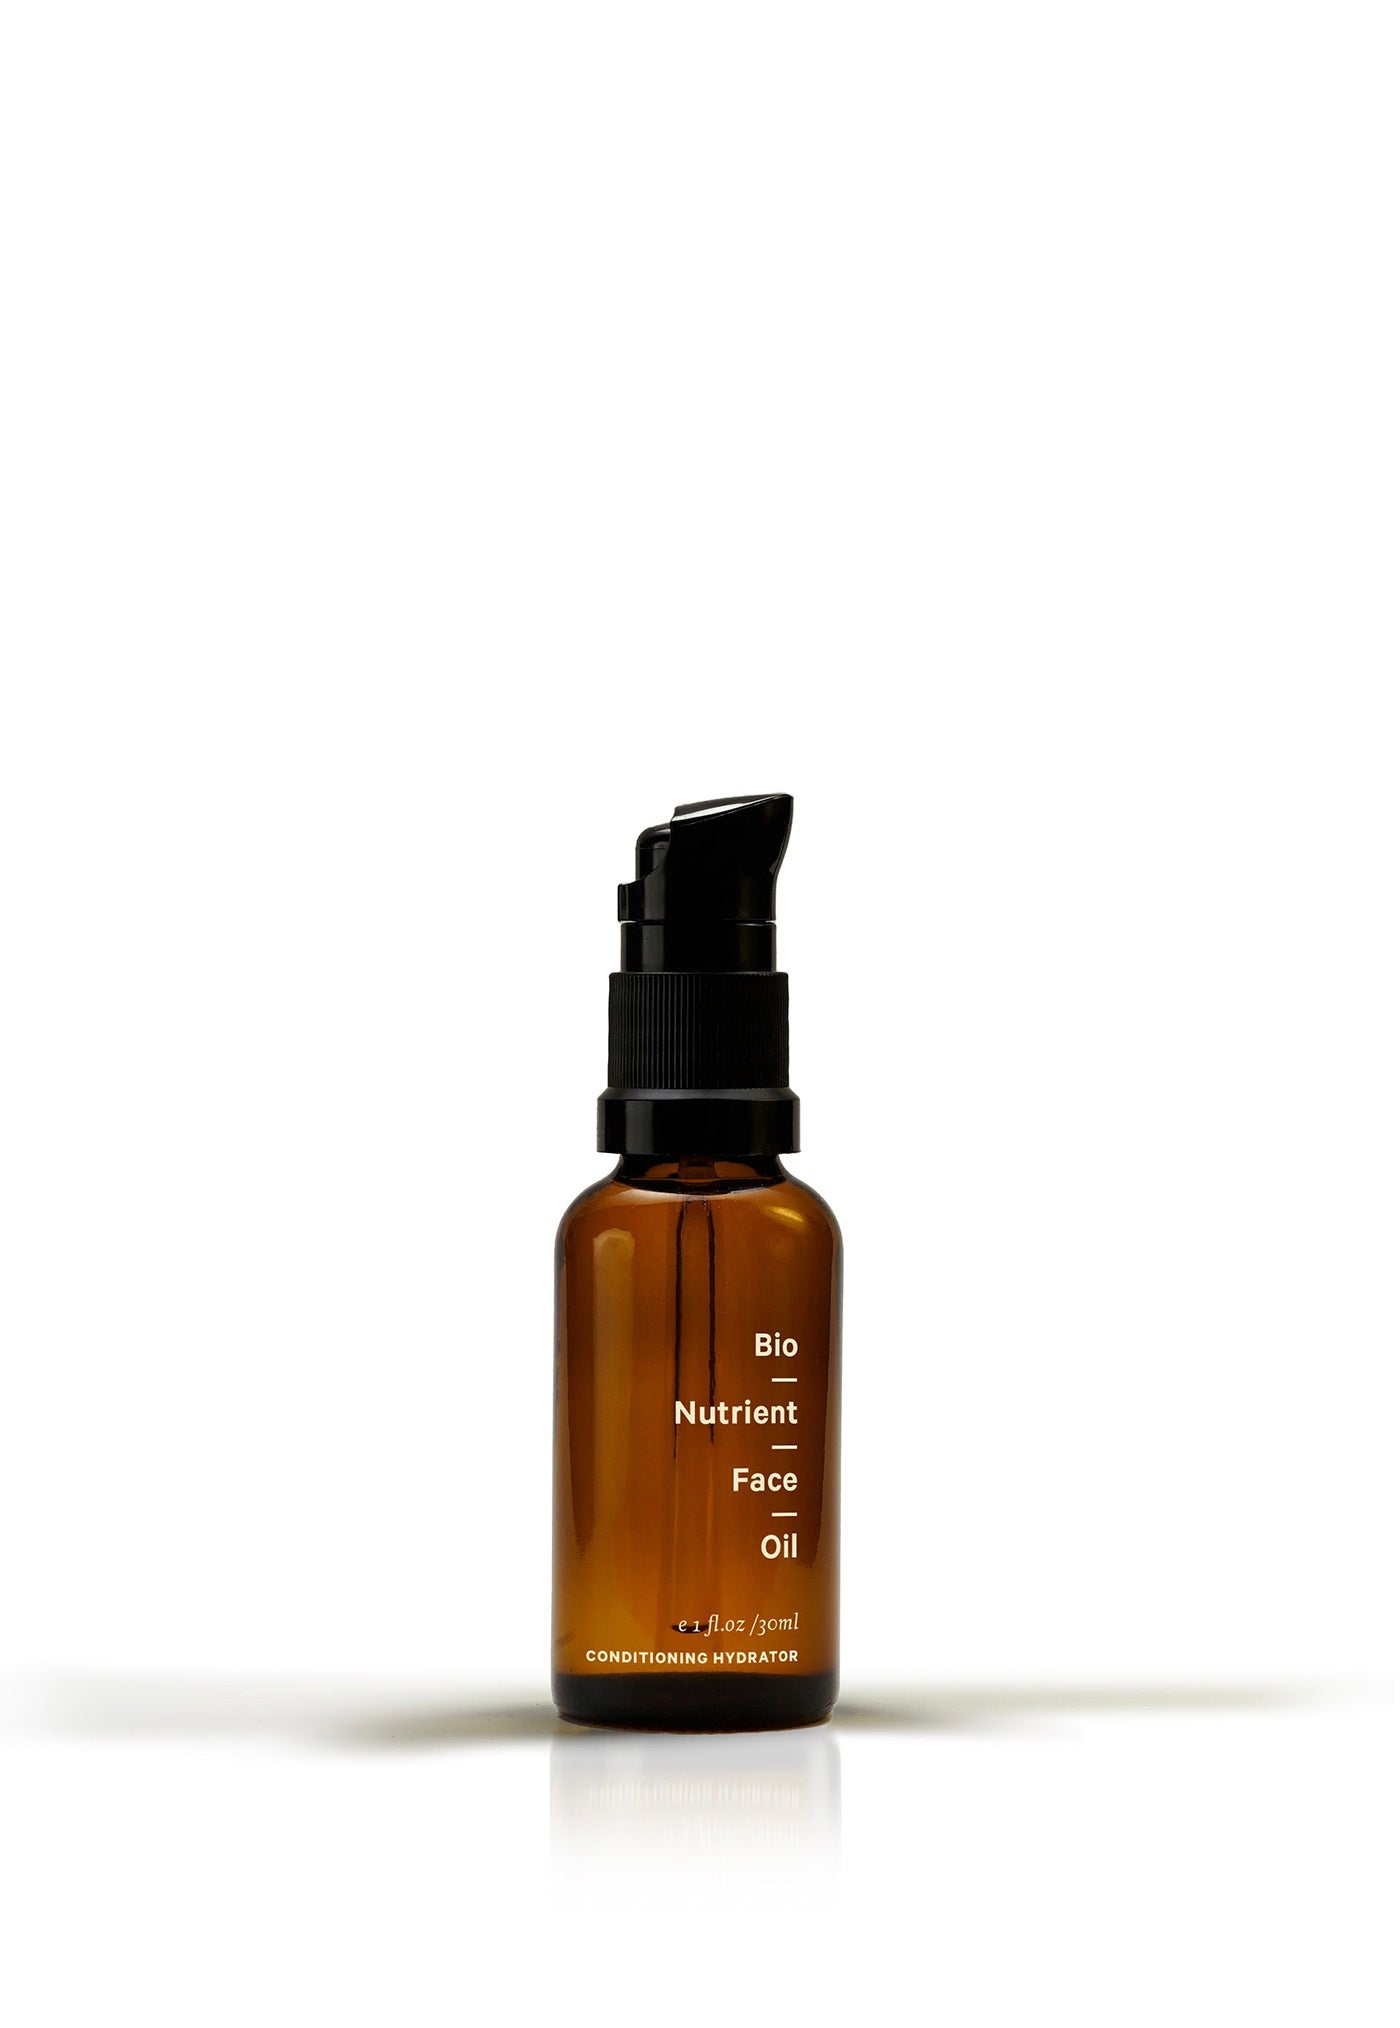 Bio-Nutrient Face Oil sold by Angel Divine